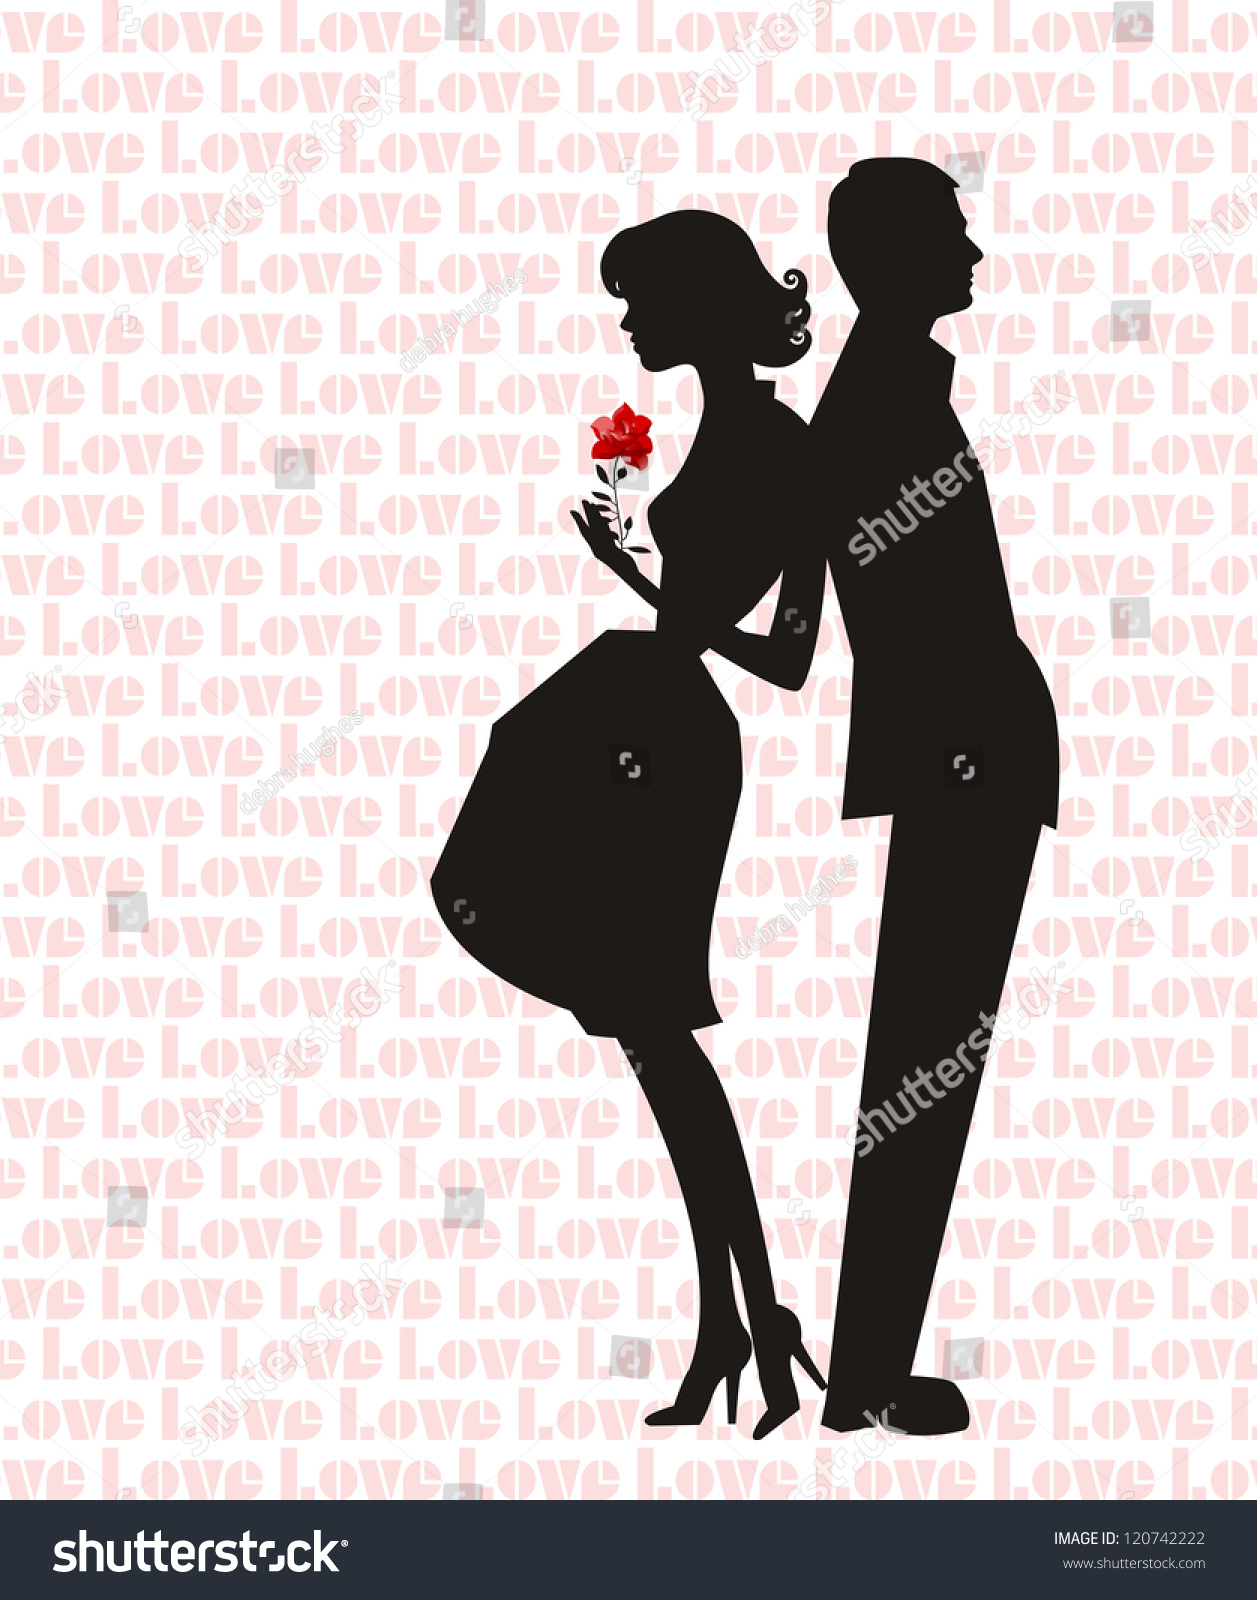 SVG of Retro man and woman silhouette (wallpaper says 